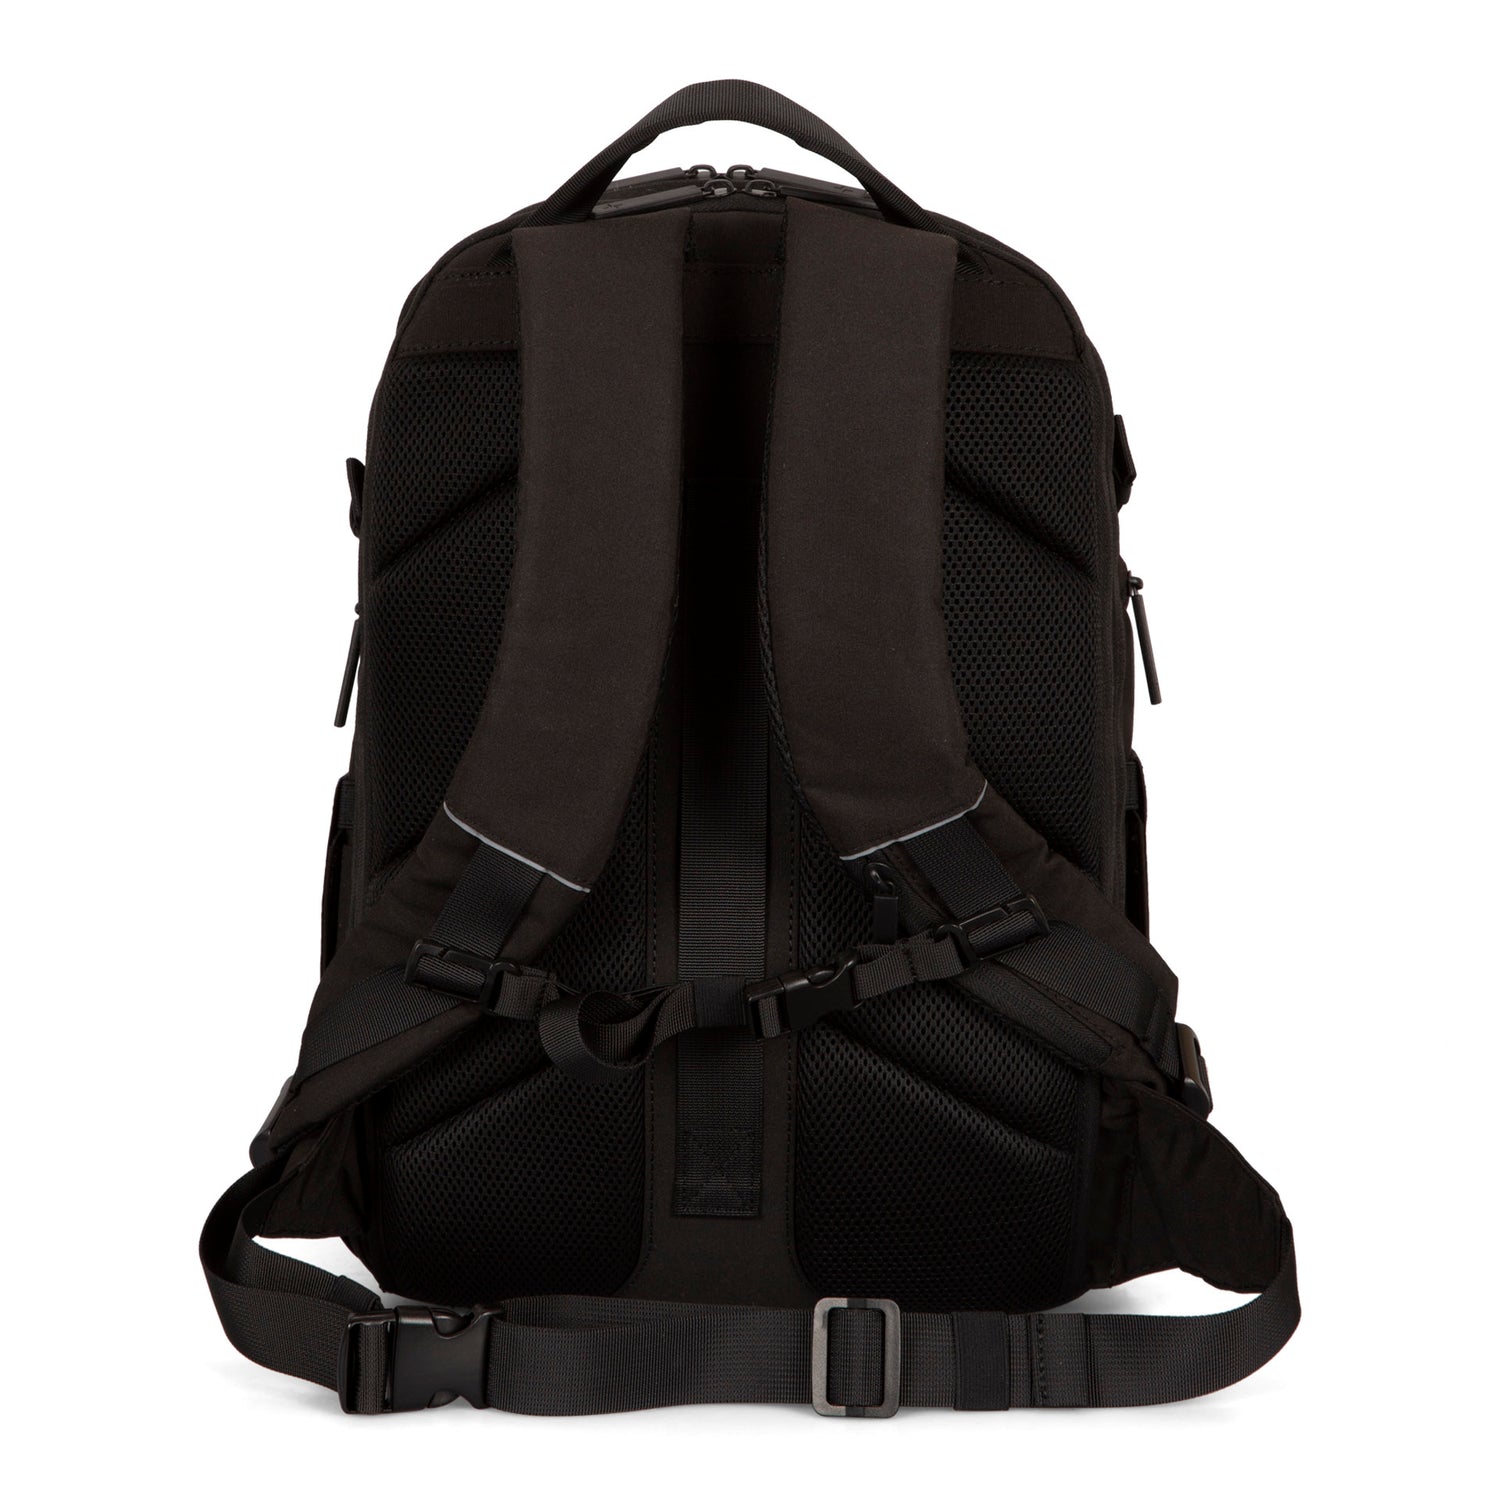 The 5 Continents Backpack - Bentley